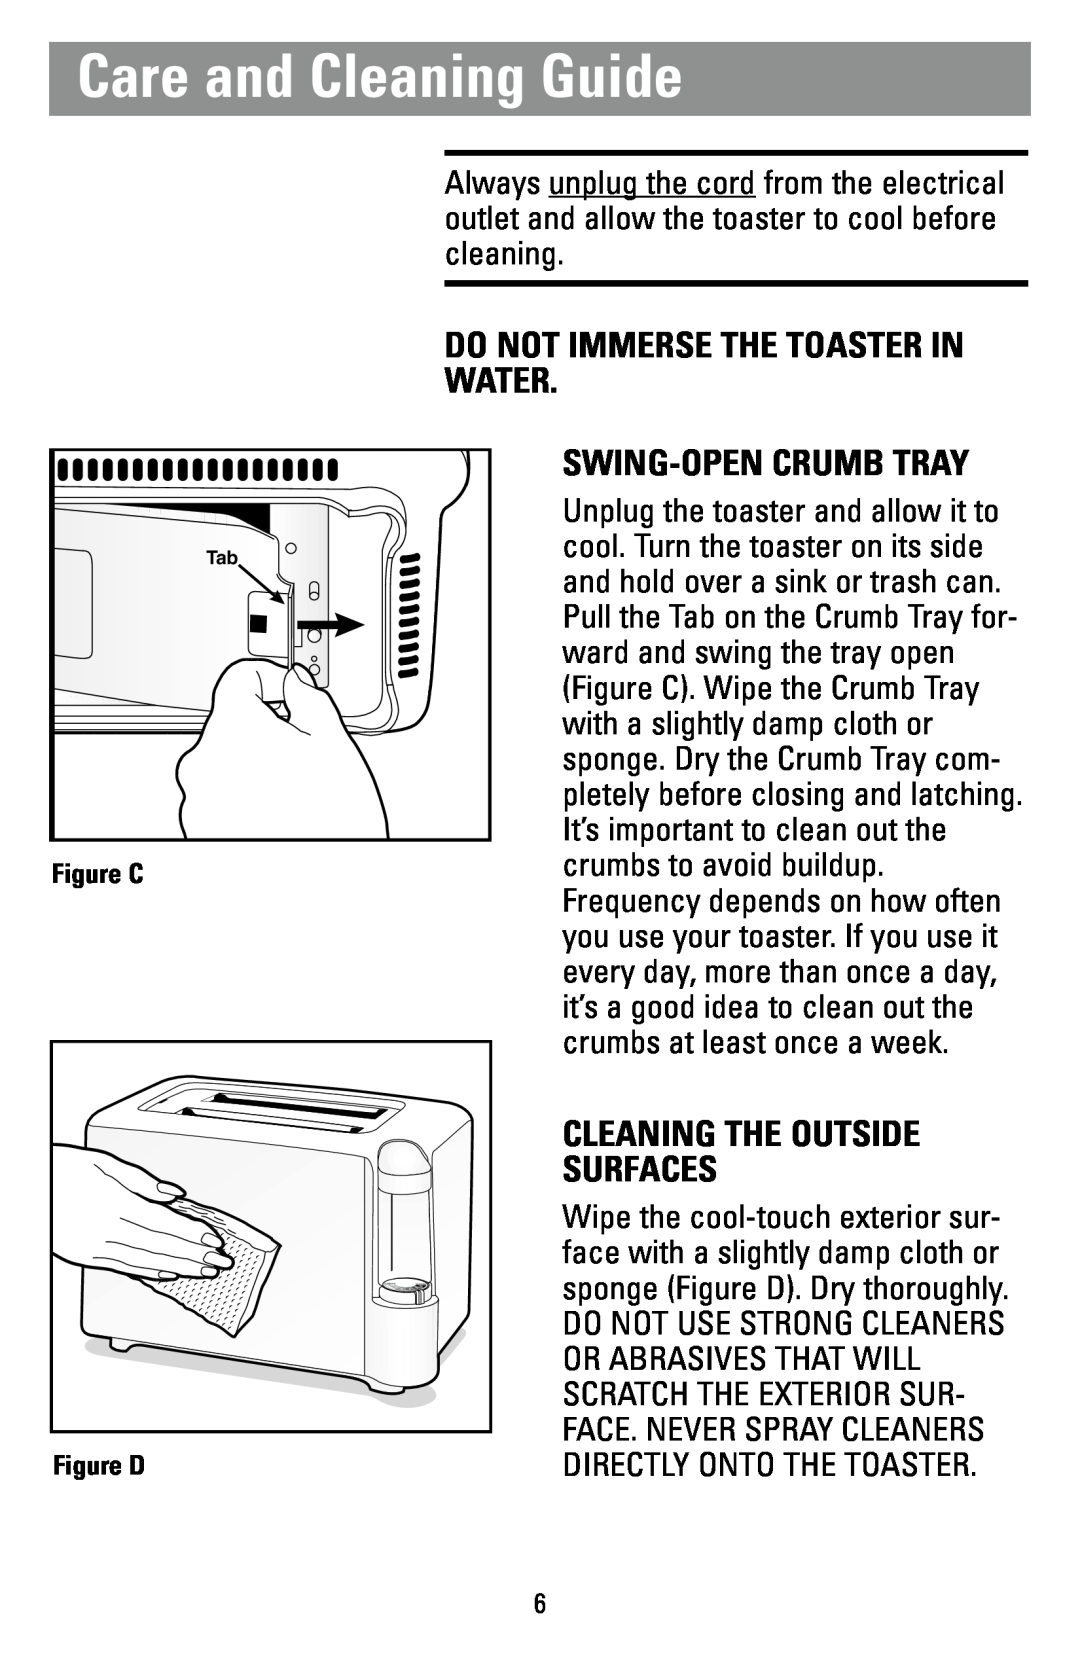 Black & Decker T271, T270 manual Care and Cleaning Guide, Do Not Immerse The Toaster In Water, Swing-Opencrumb Tray 